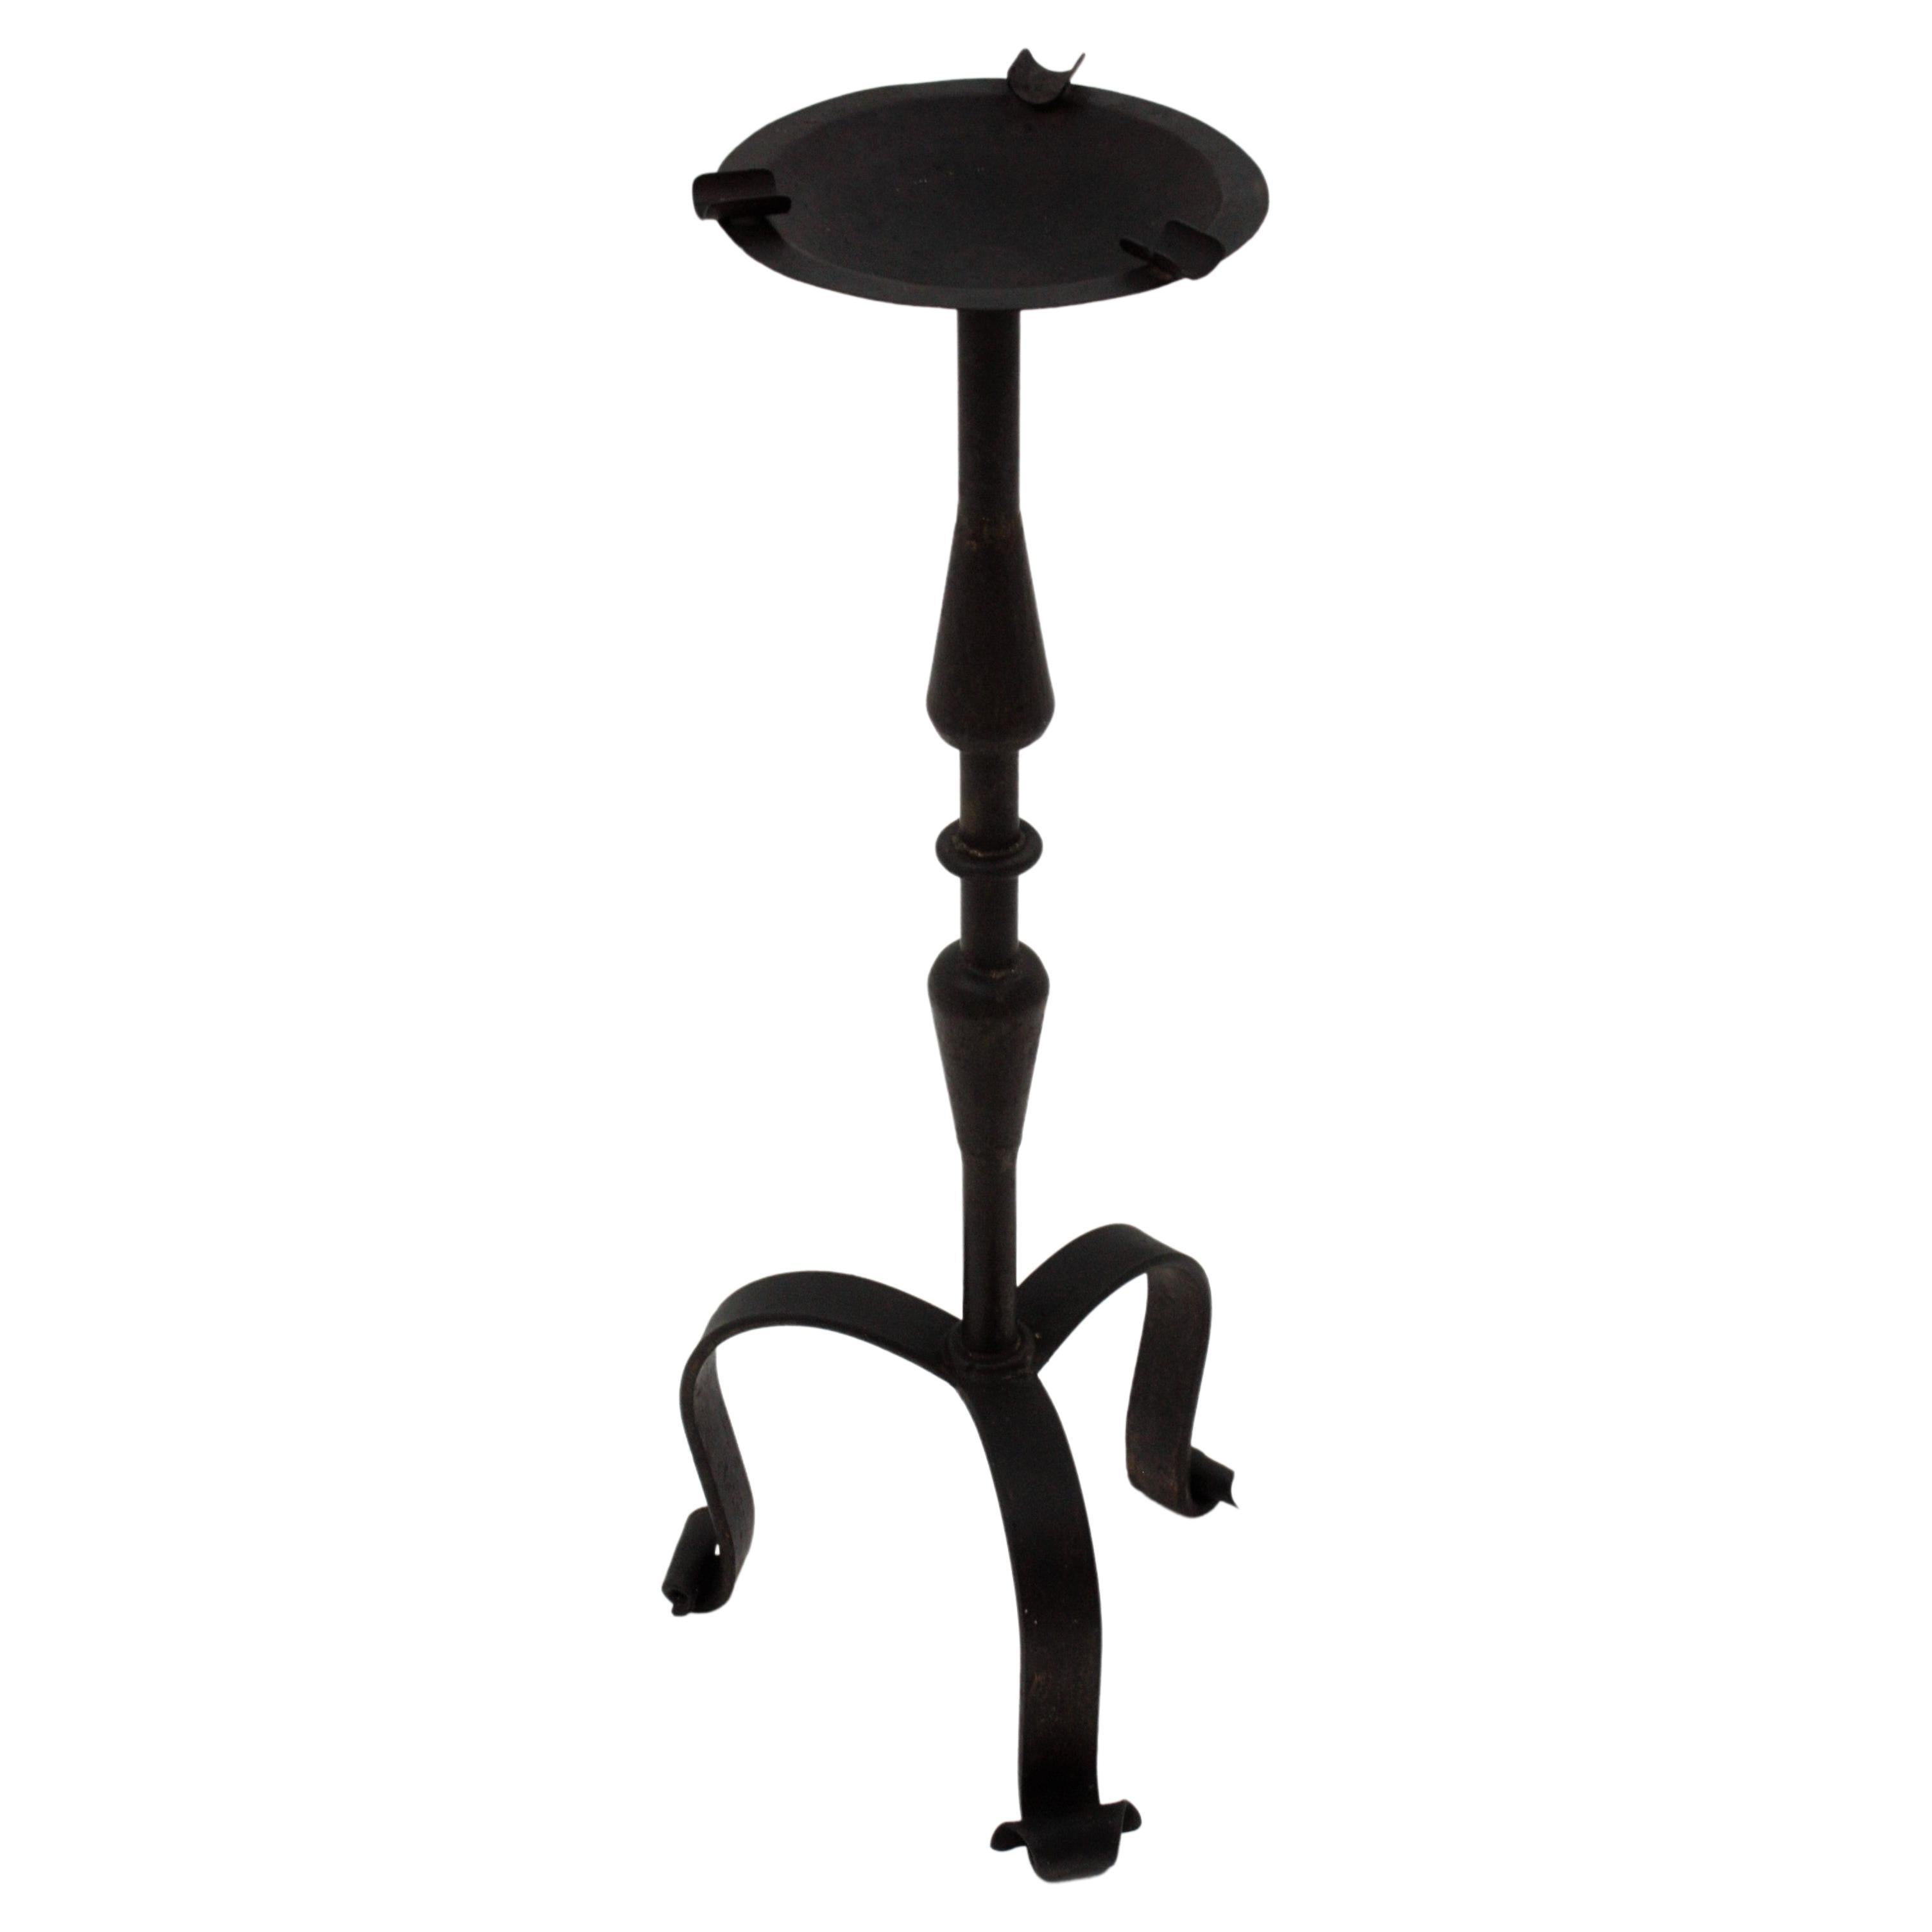 Gothic Revival Spanish Drinks Table / End Table / Floor Ashtray in Wrought Iron For Sale